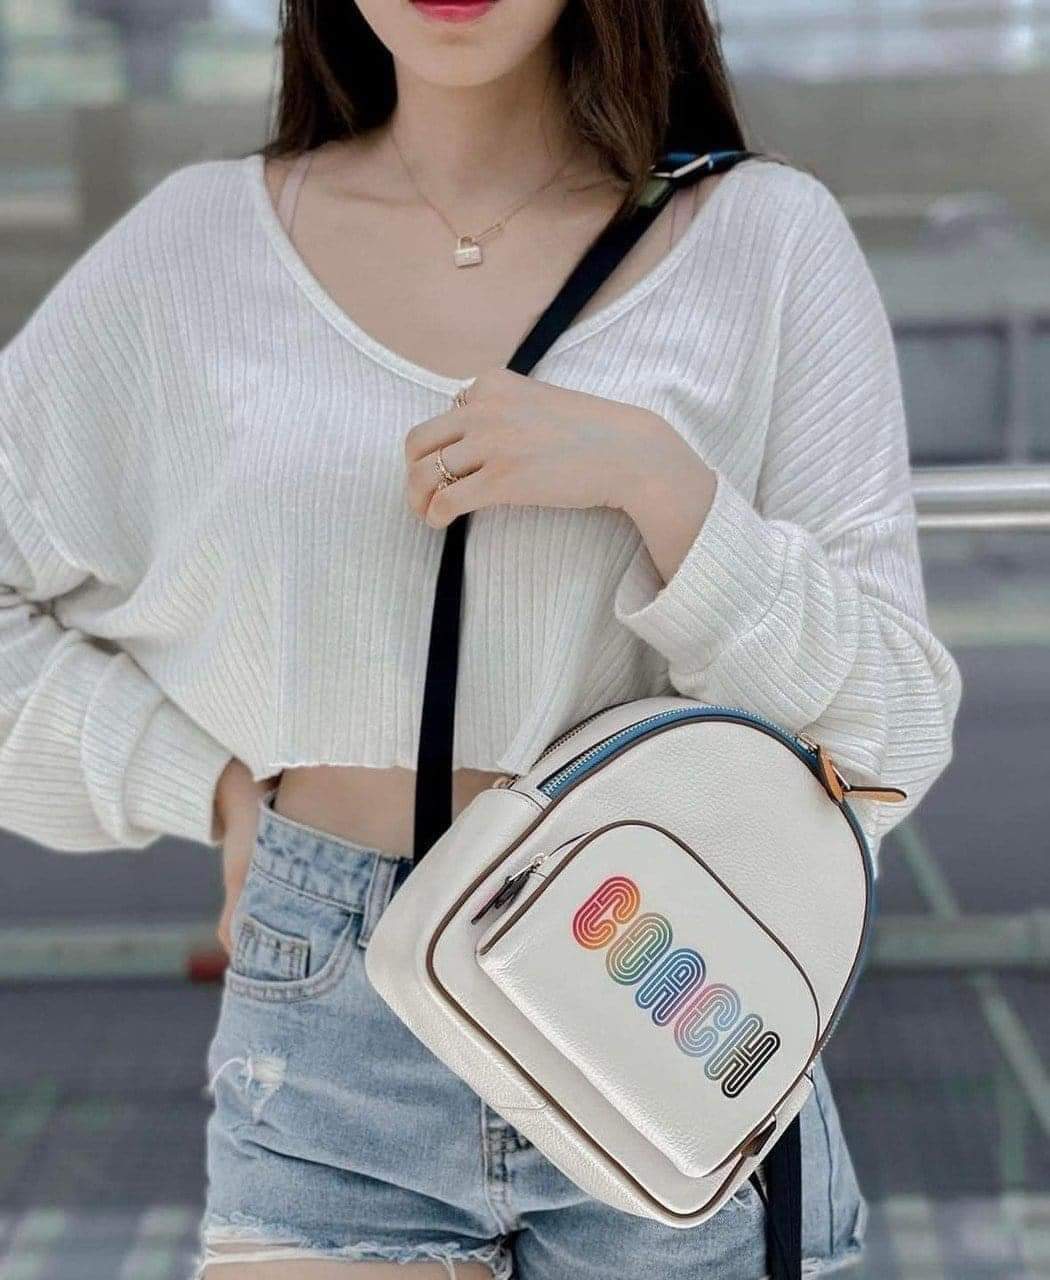 BALO HỌA TIẾT CẦU VỒNG COACH MINI COURT BACKPACK WITH RAINBOW 6